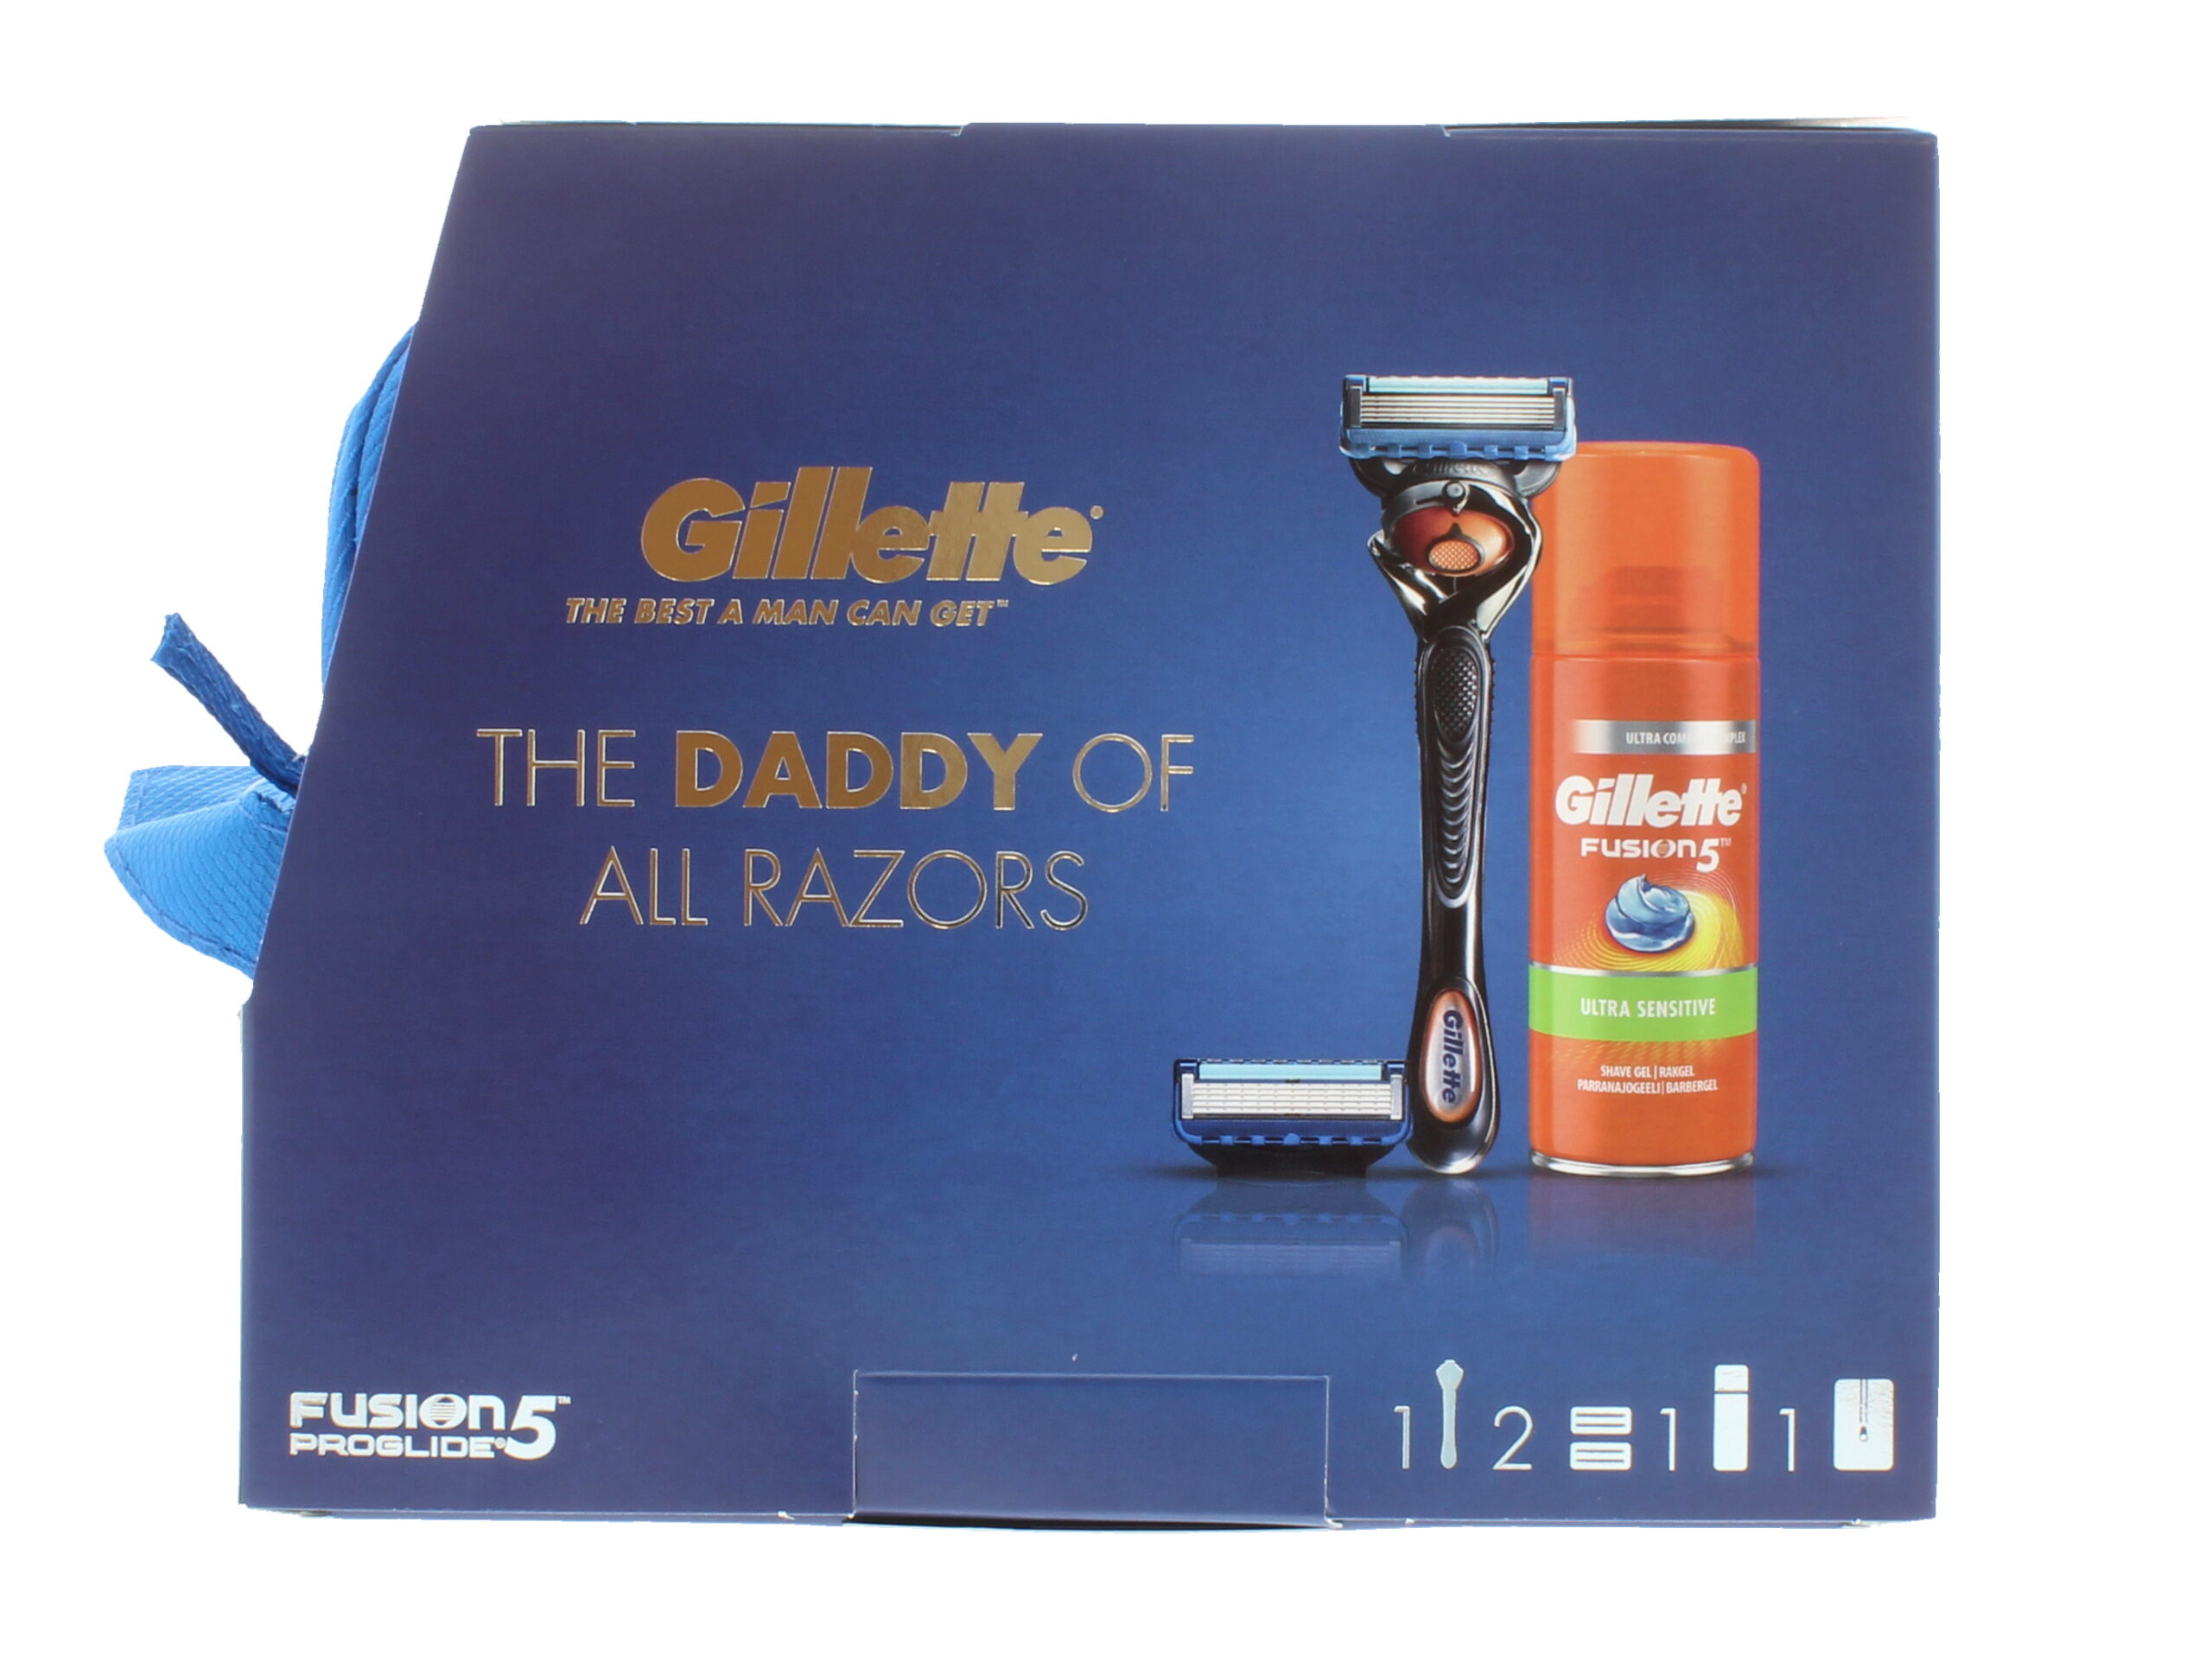 GILLETTE “THE DADDY OF ALL RAZONS ” FUSION 5 PROGLIDE GIFT SET